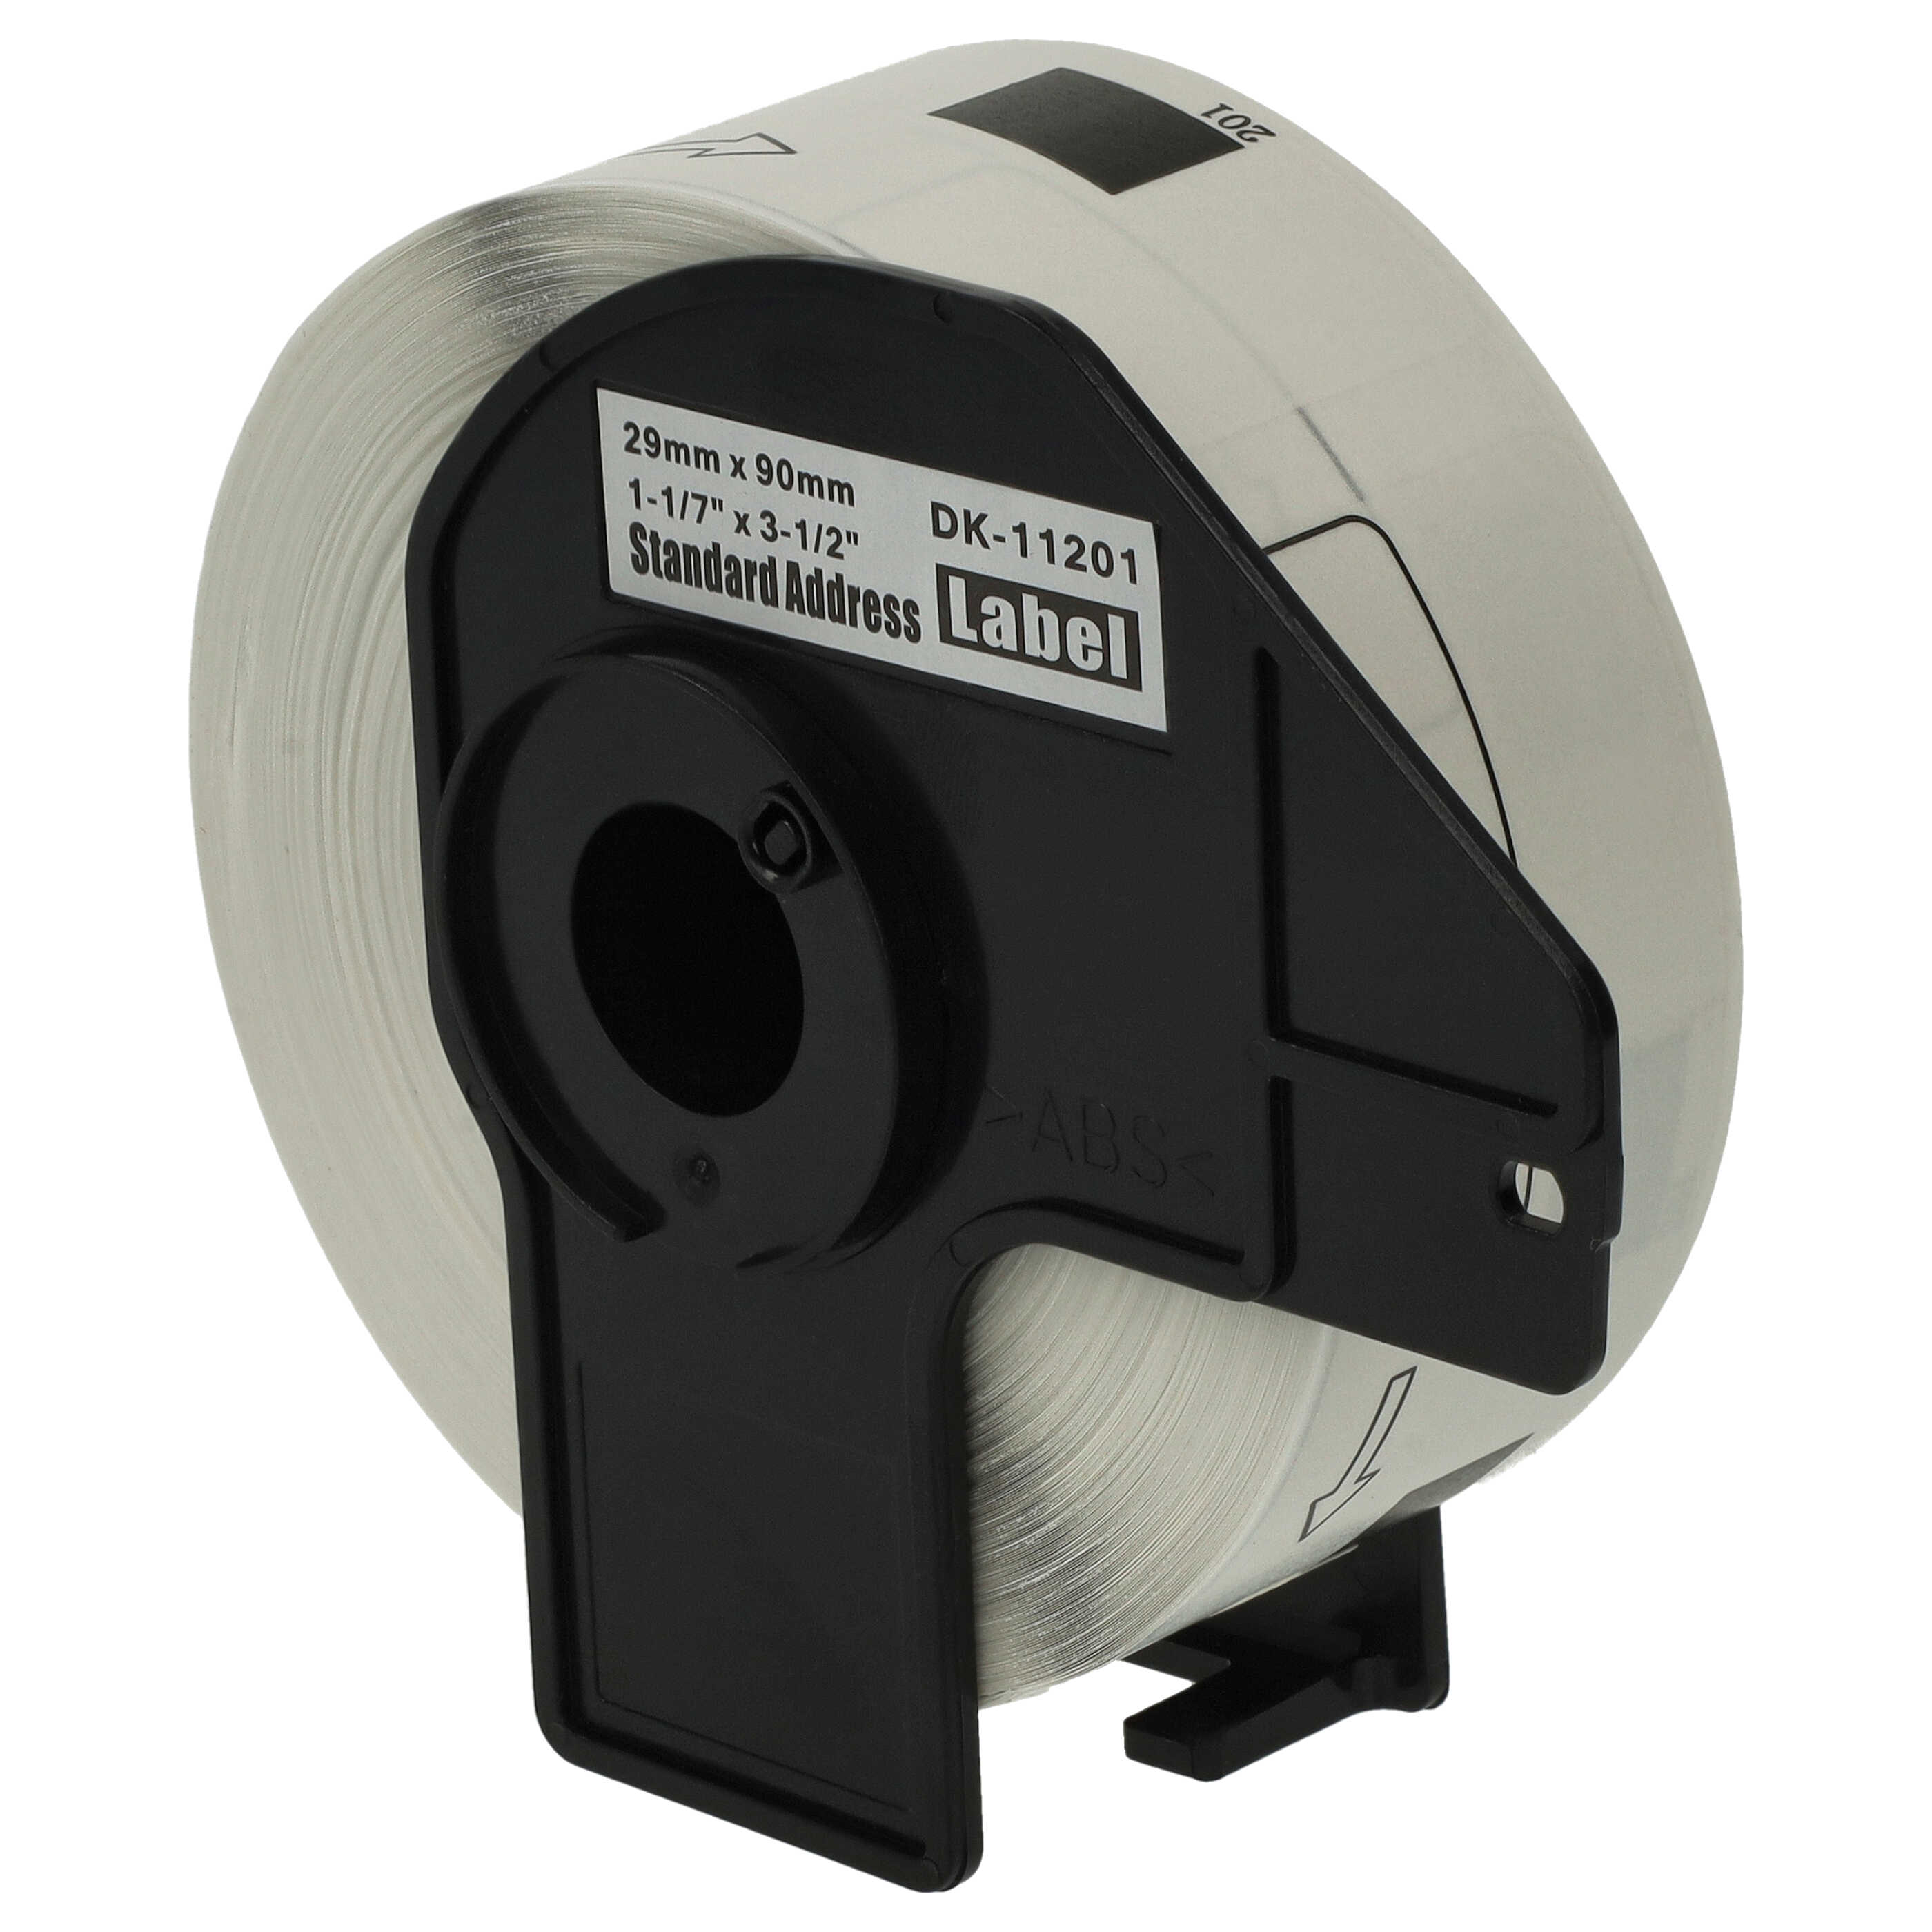 Labels replaces Brother DK-11201 for Labeller - Premium 29 mm x 90 mm + Holder